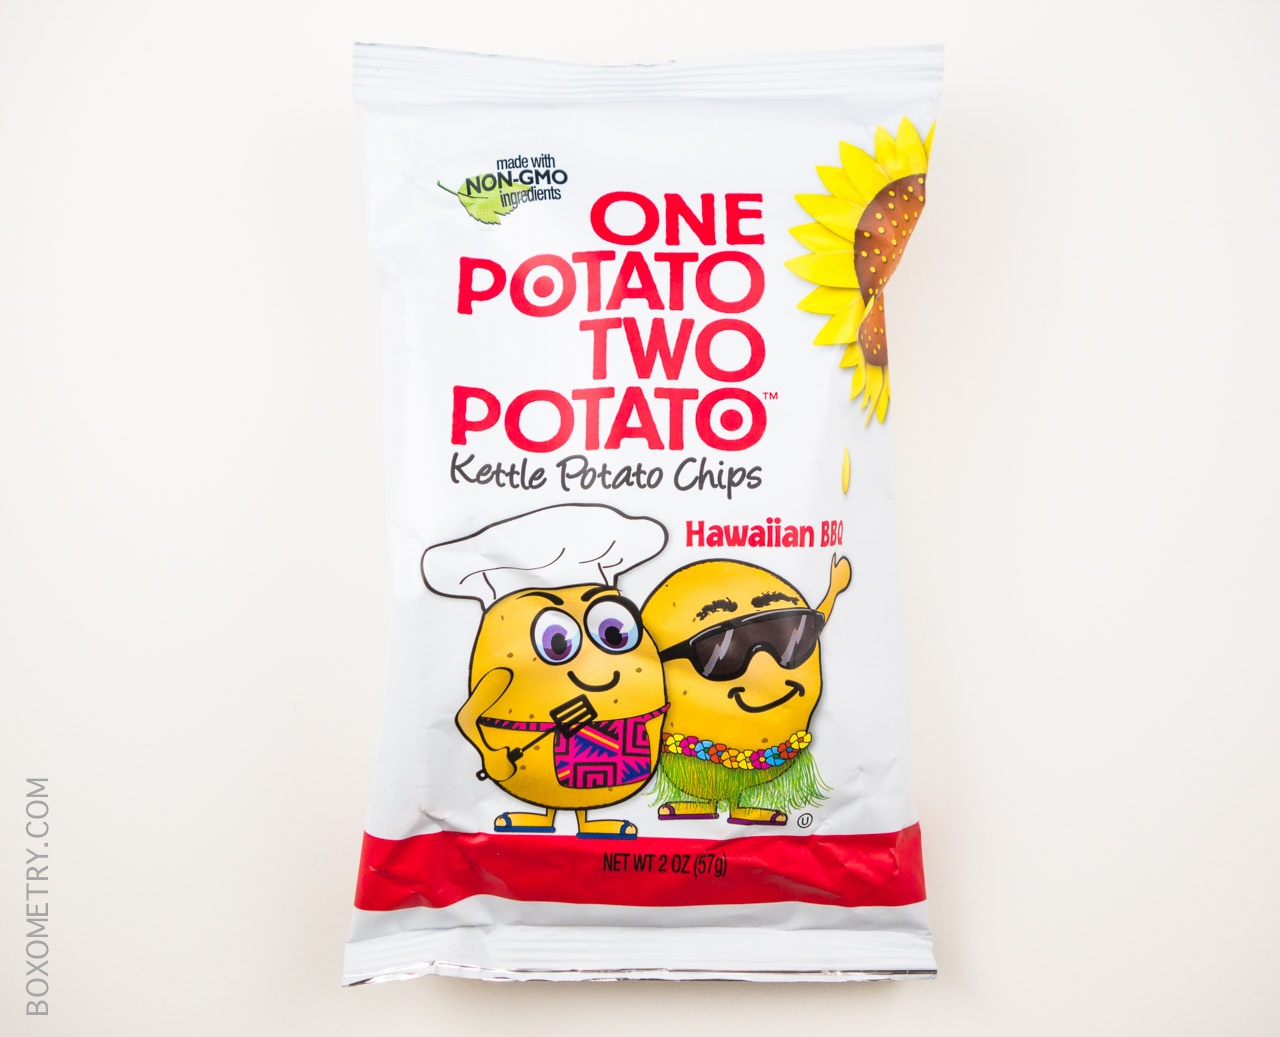 Boxometry Love With Food Tasting Box Review July 2015 - Hawaiian BBQ by One Potato Two Potato